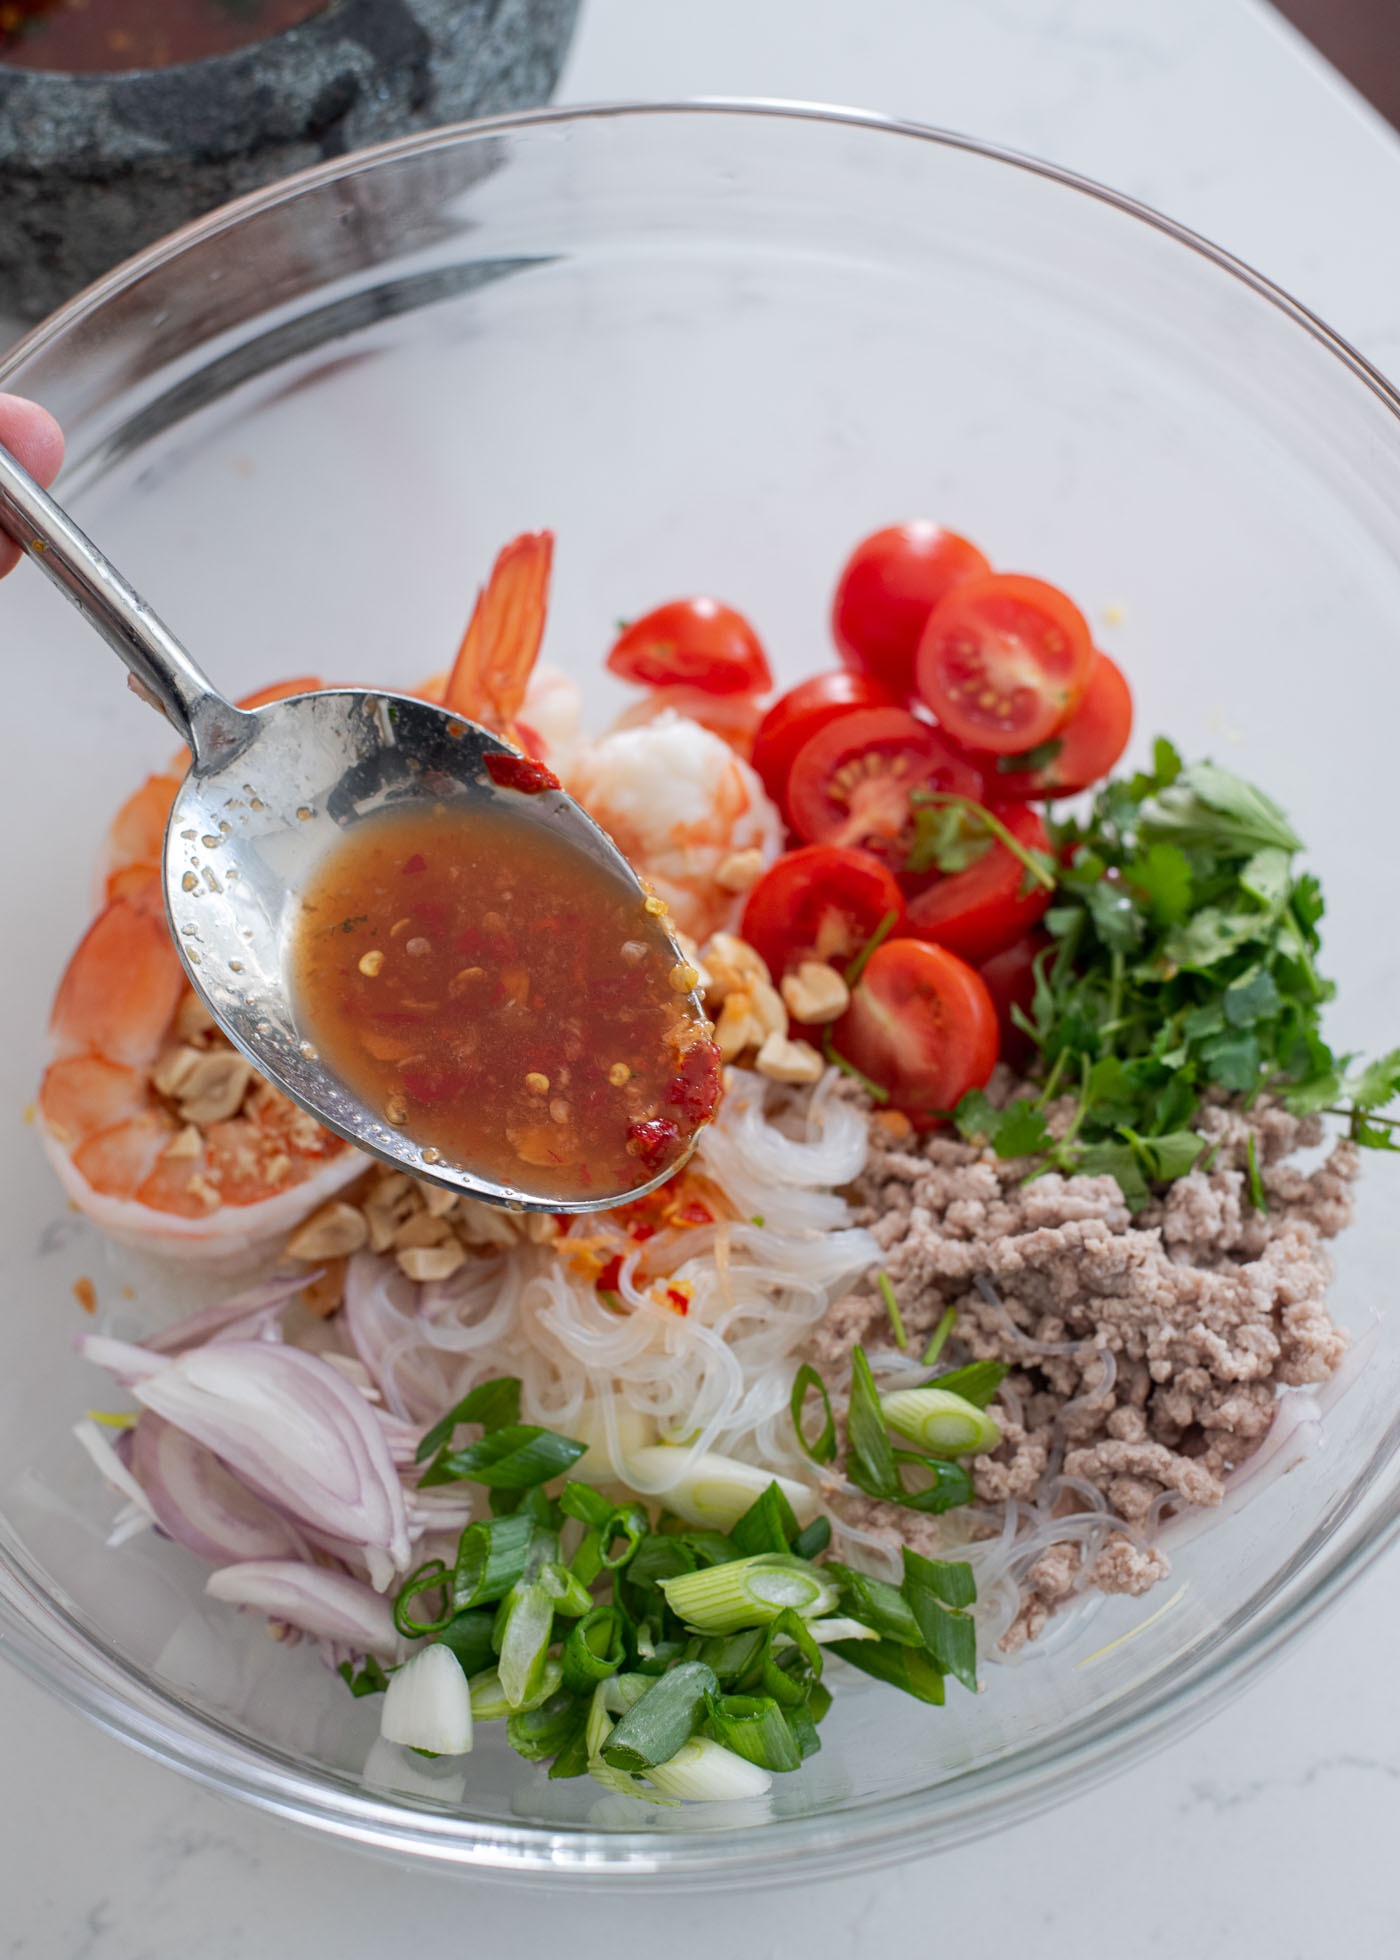 Thai chili and fish sauce dressing is spooned over glass noodle salad ingredients in a mixing bowl.